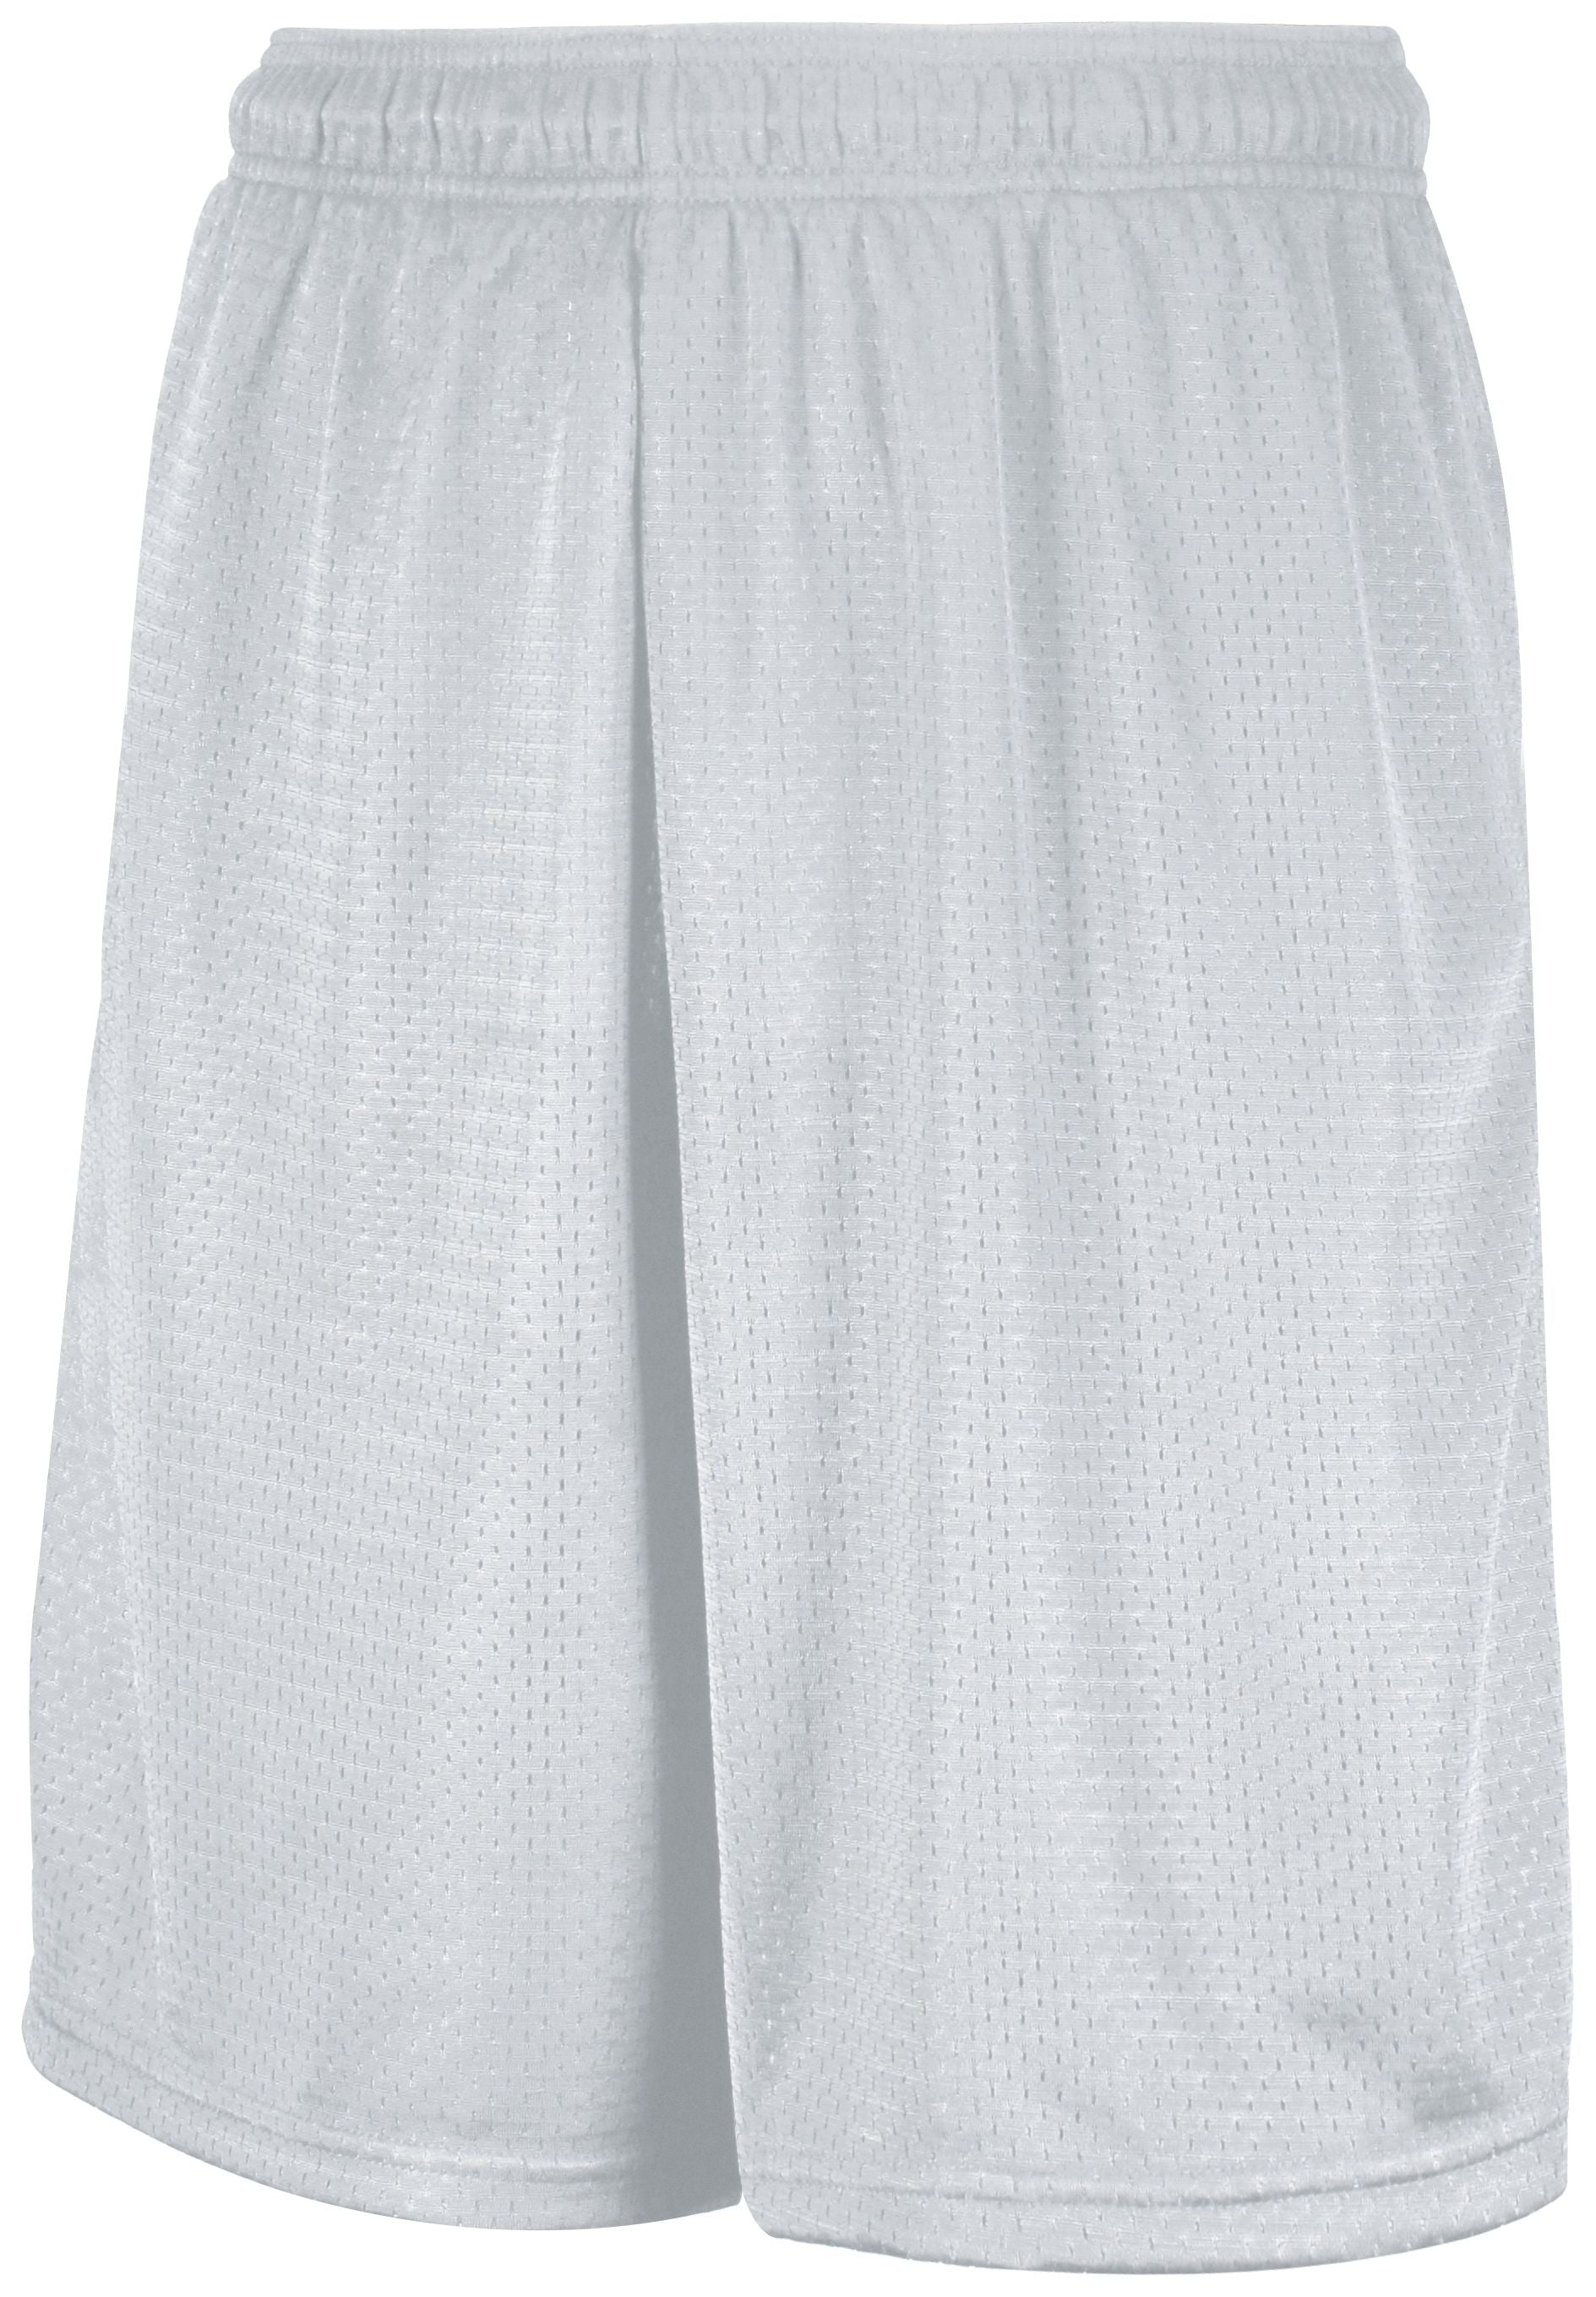 Russell Athletic Mesh Shorts With Pockets in White  -Part of the Adult, Adult-Shorts, Russell-Athletic-Products product lines at KanaleyCreations.com